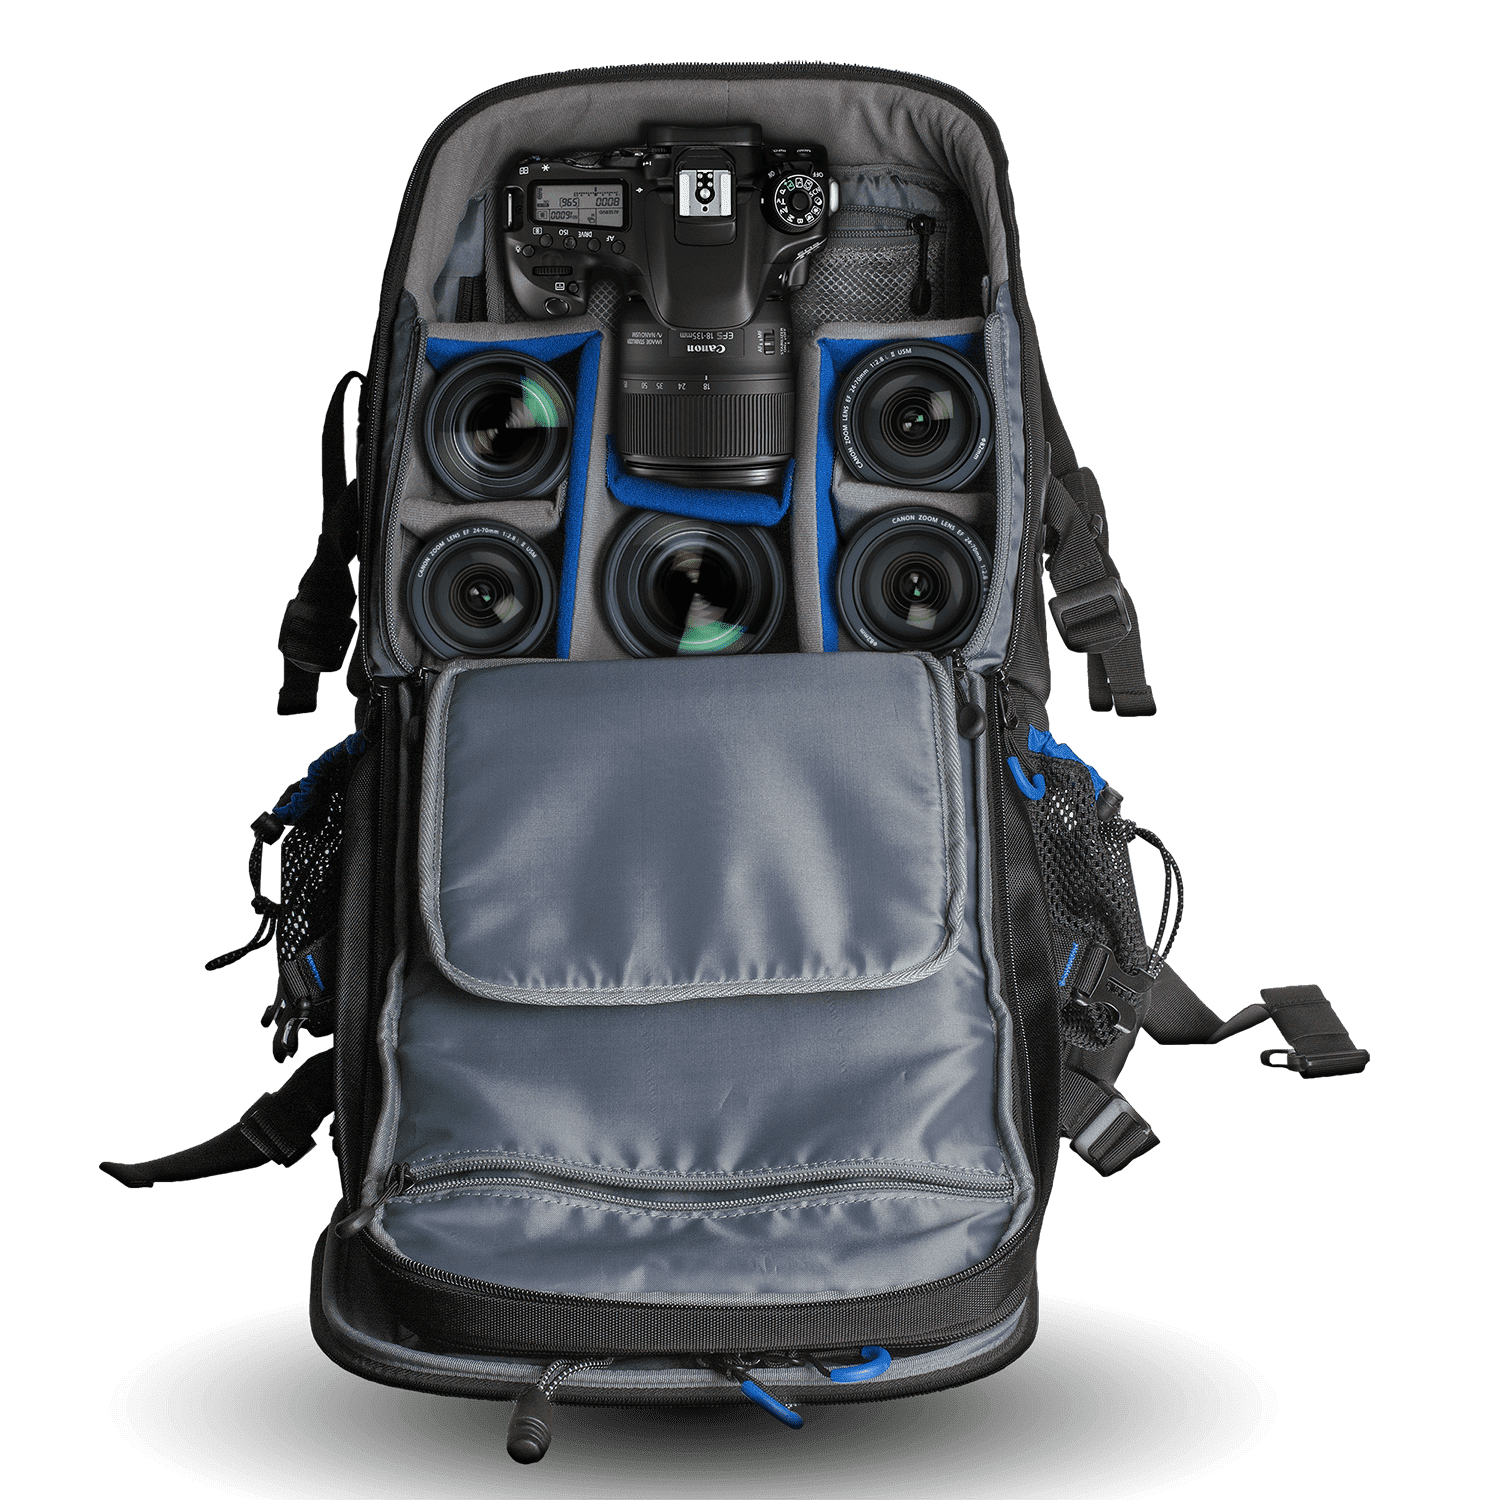 Tear Resistance for DSLR Cameras and Laptops Shock Resistance Ultimaxx’s Professional Deluxe Ultra-Lightweight Camera Backpack with Removable Insert 